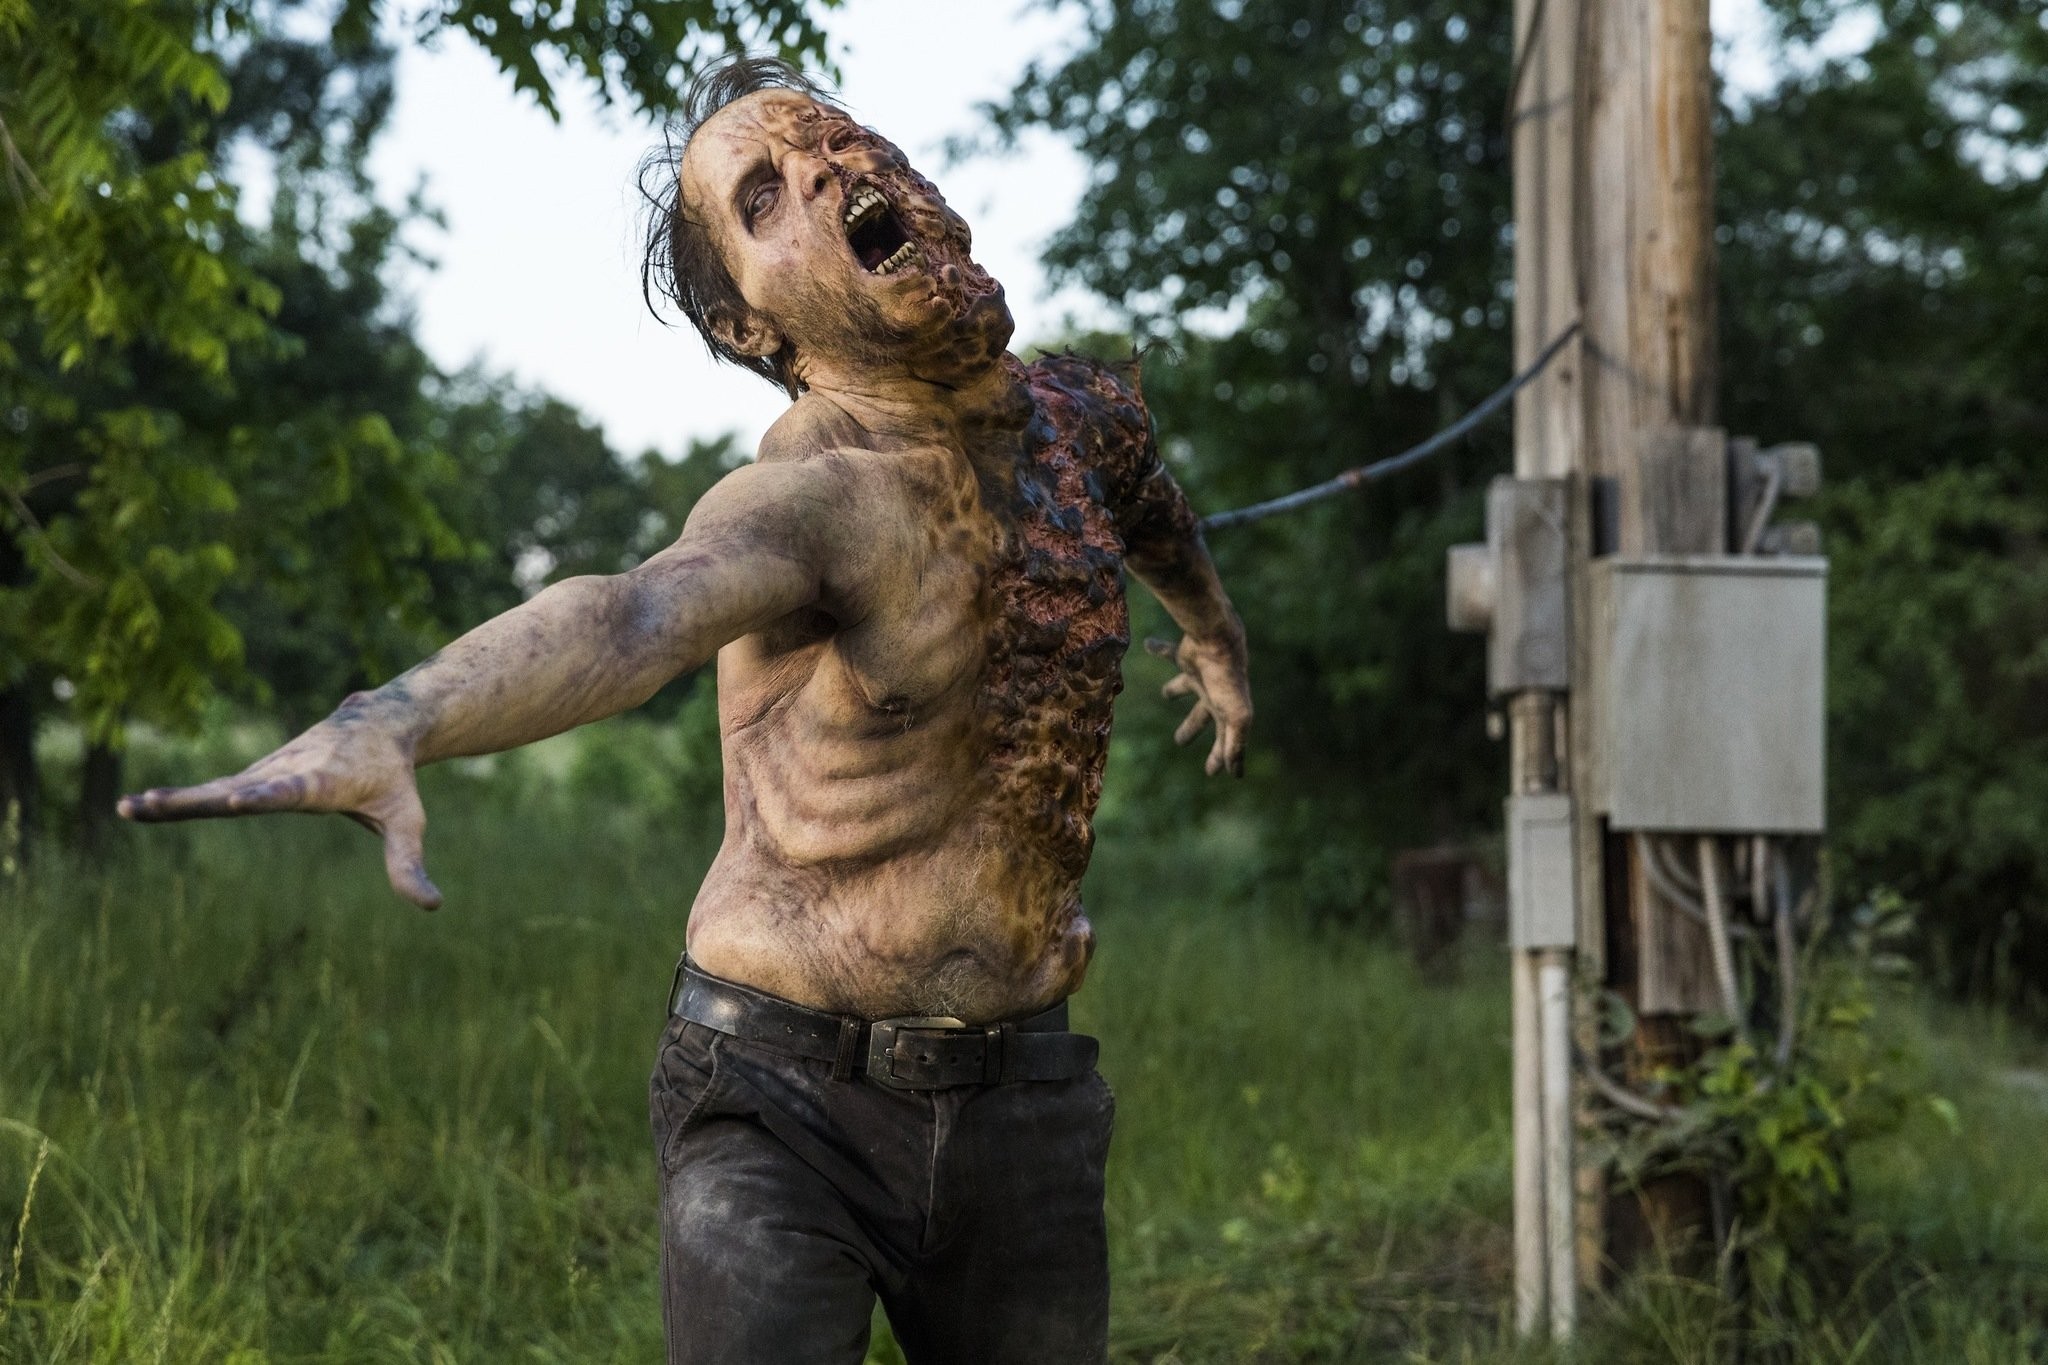 ankita mahajan recommends does the walking dead have nudity pic